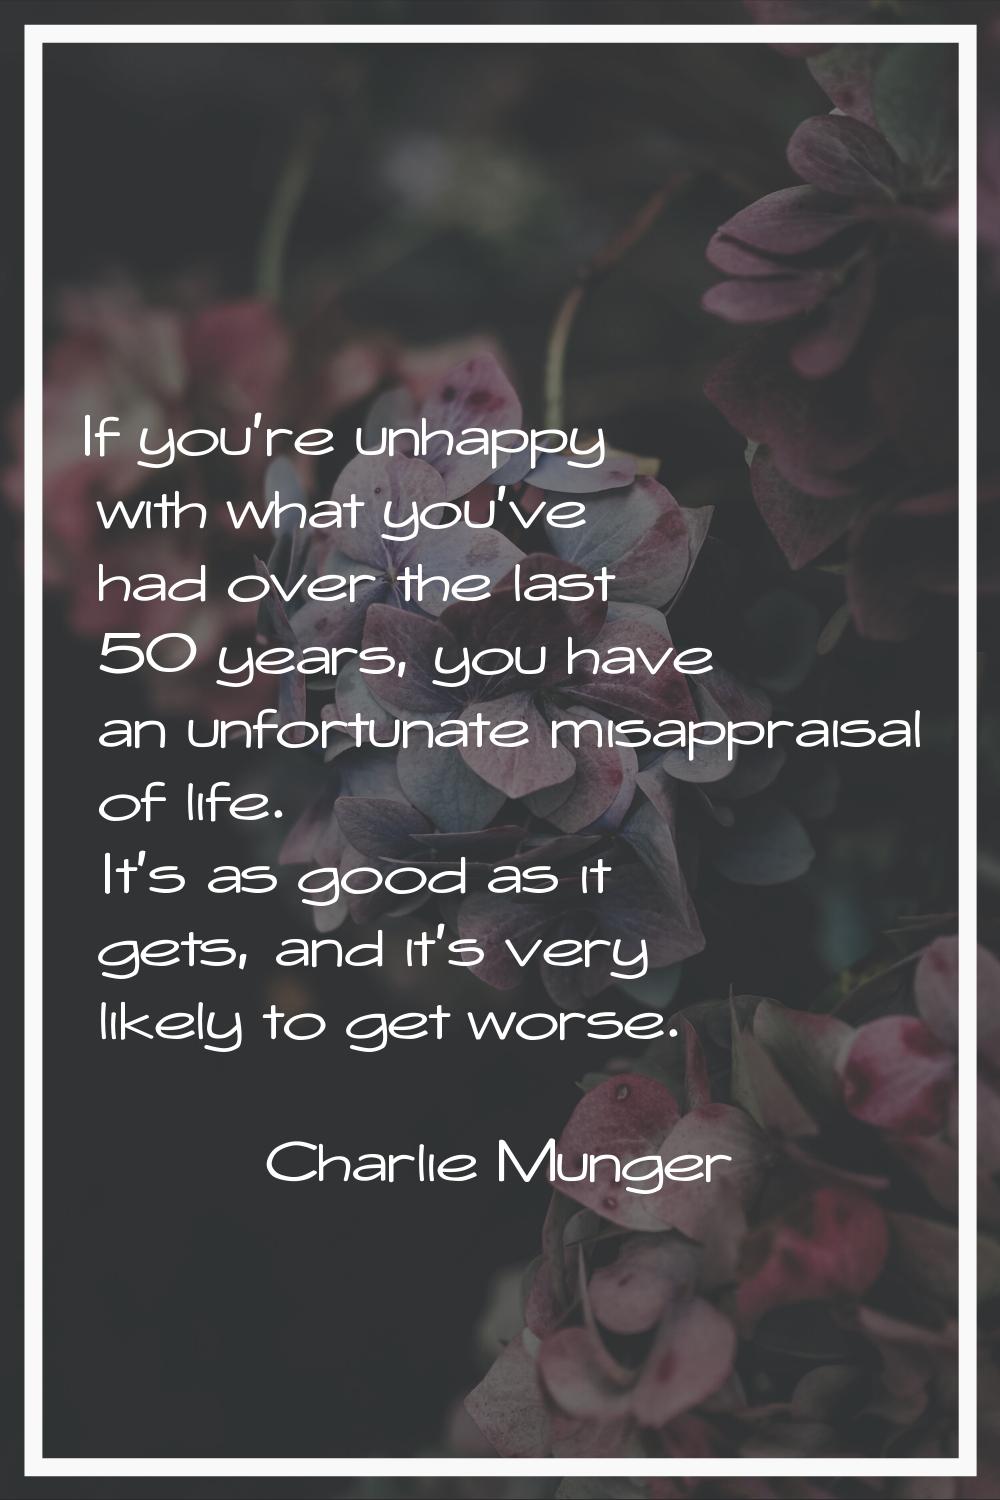 If you're unhappy with what you've had over the last 50 years, you have an unfortunate misappraisal